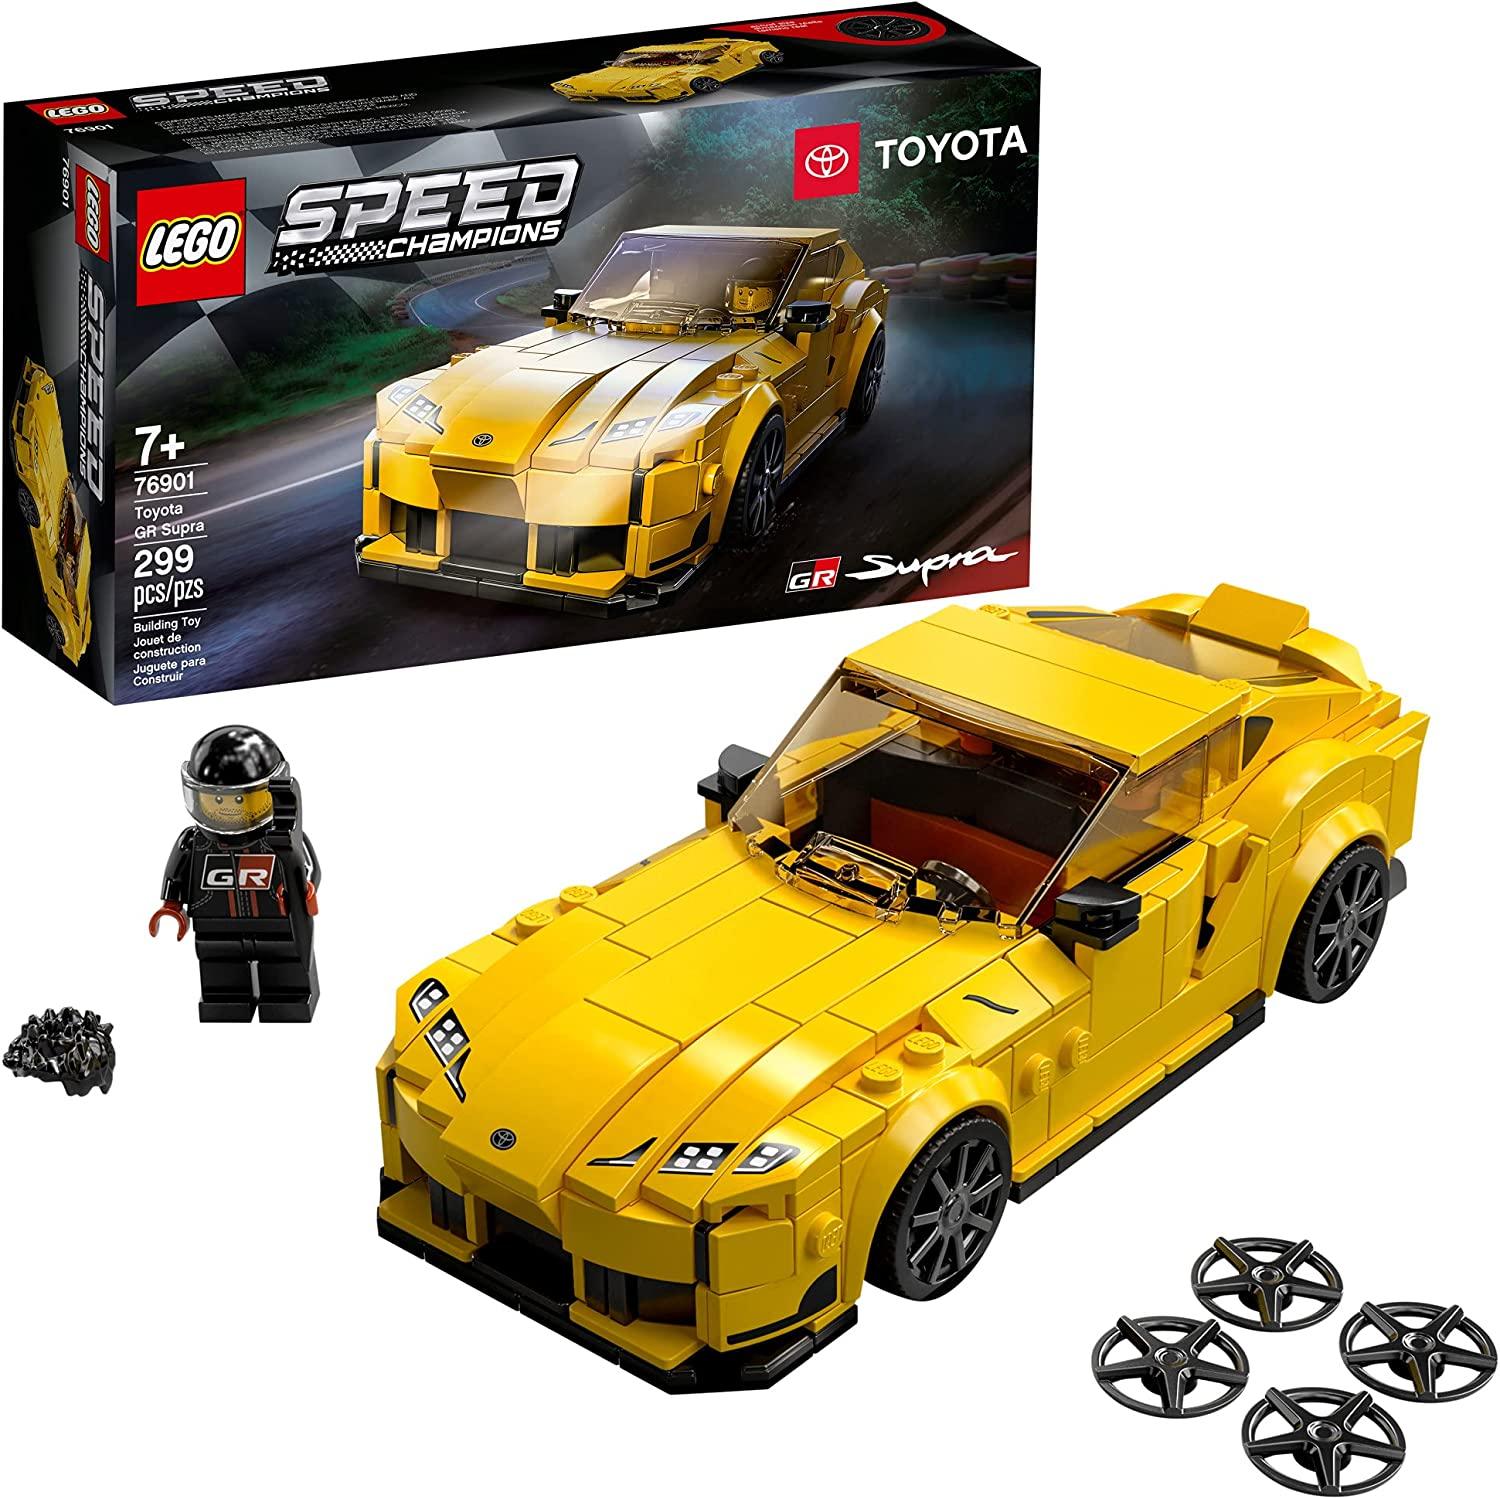 LEGO Speed Champions Toyota GR Supra Building Kit for $16.99